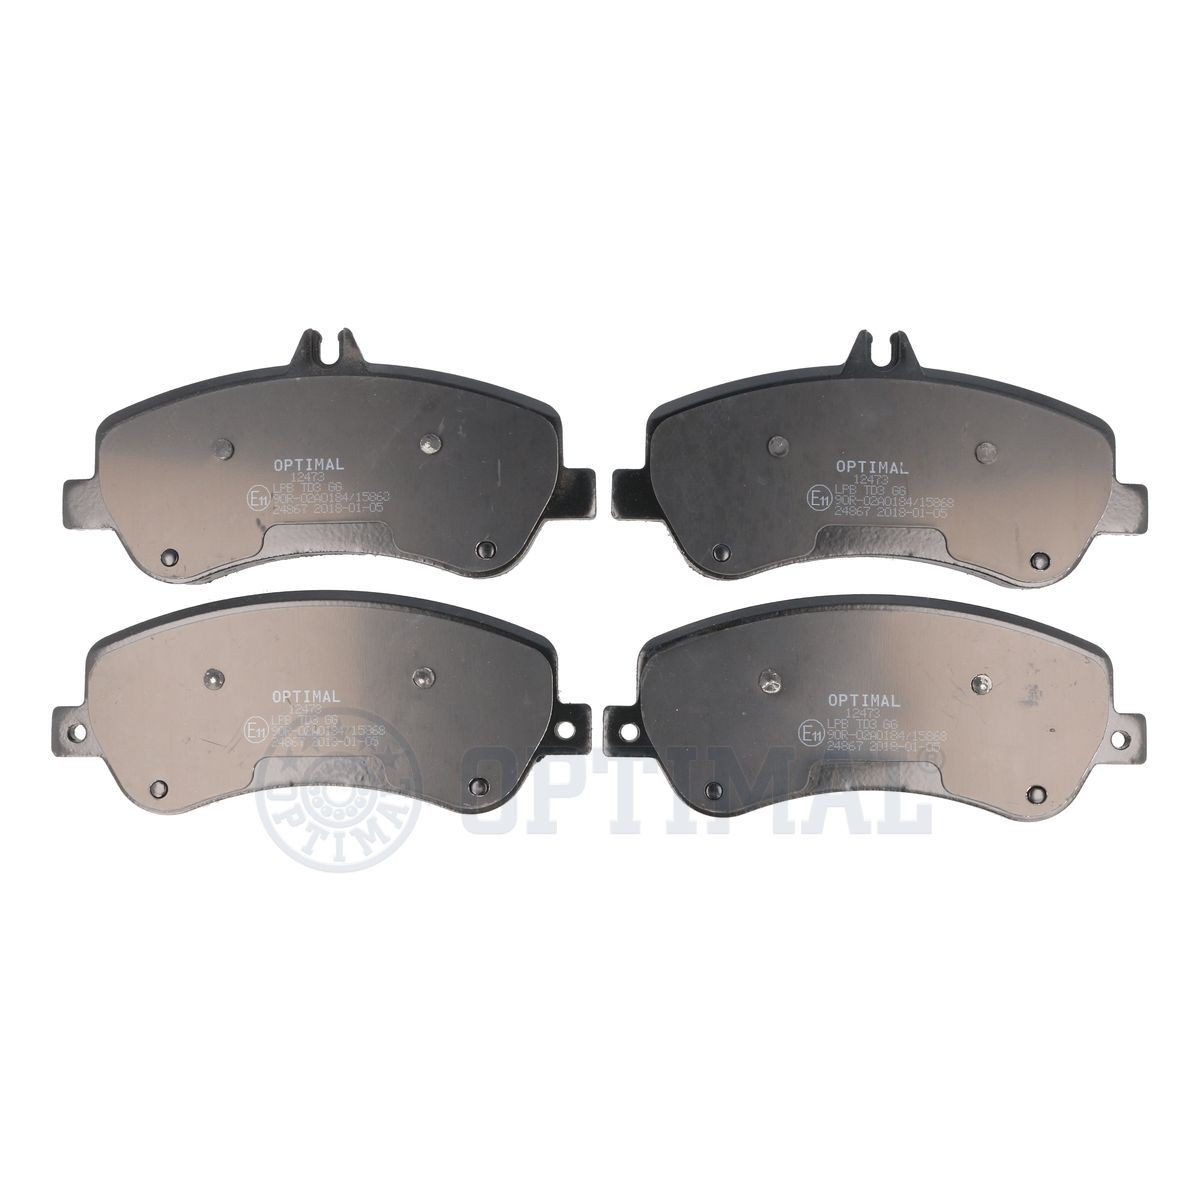 OPTIMAL BP-12473 Brake pad set Front Axle, prepared for wear indicator, excl. wear warning contact